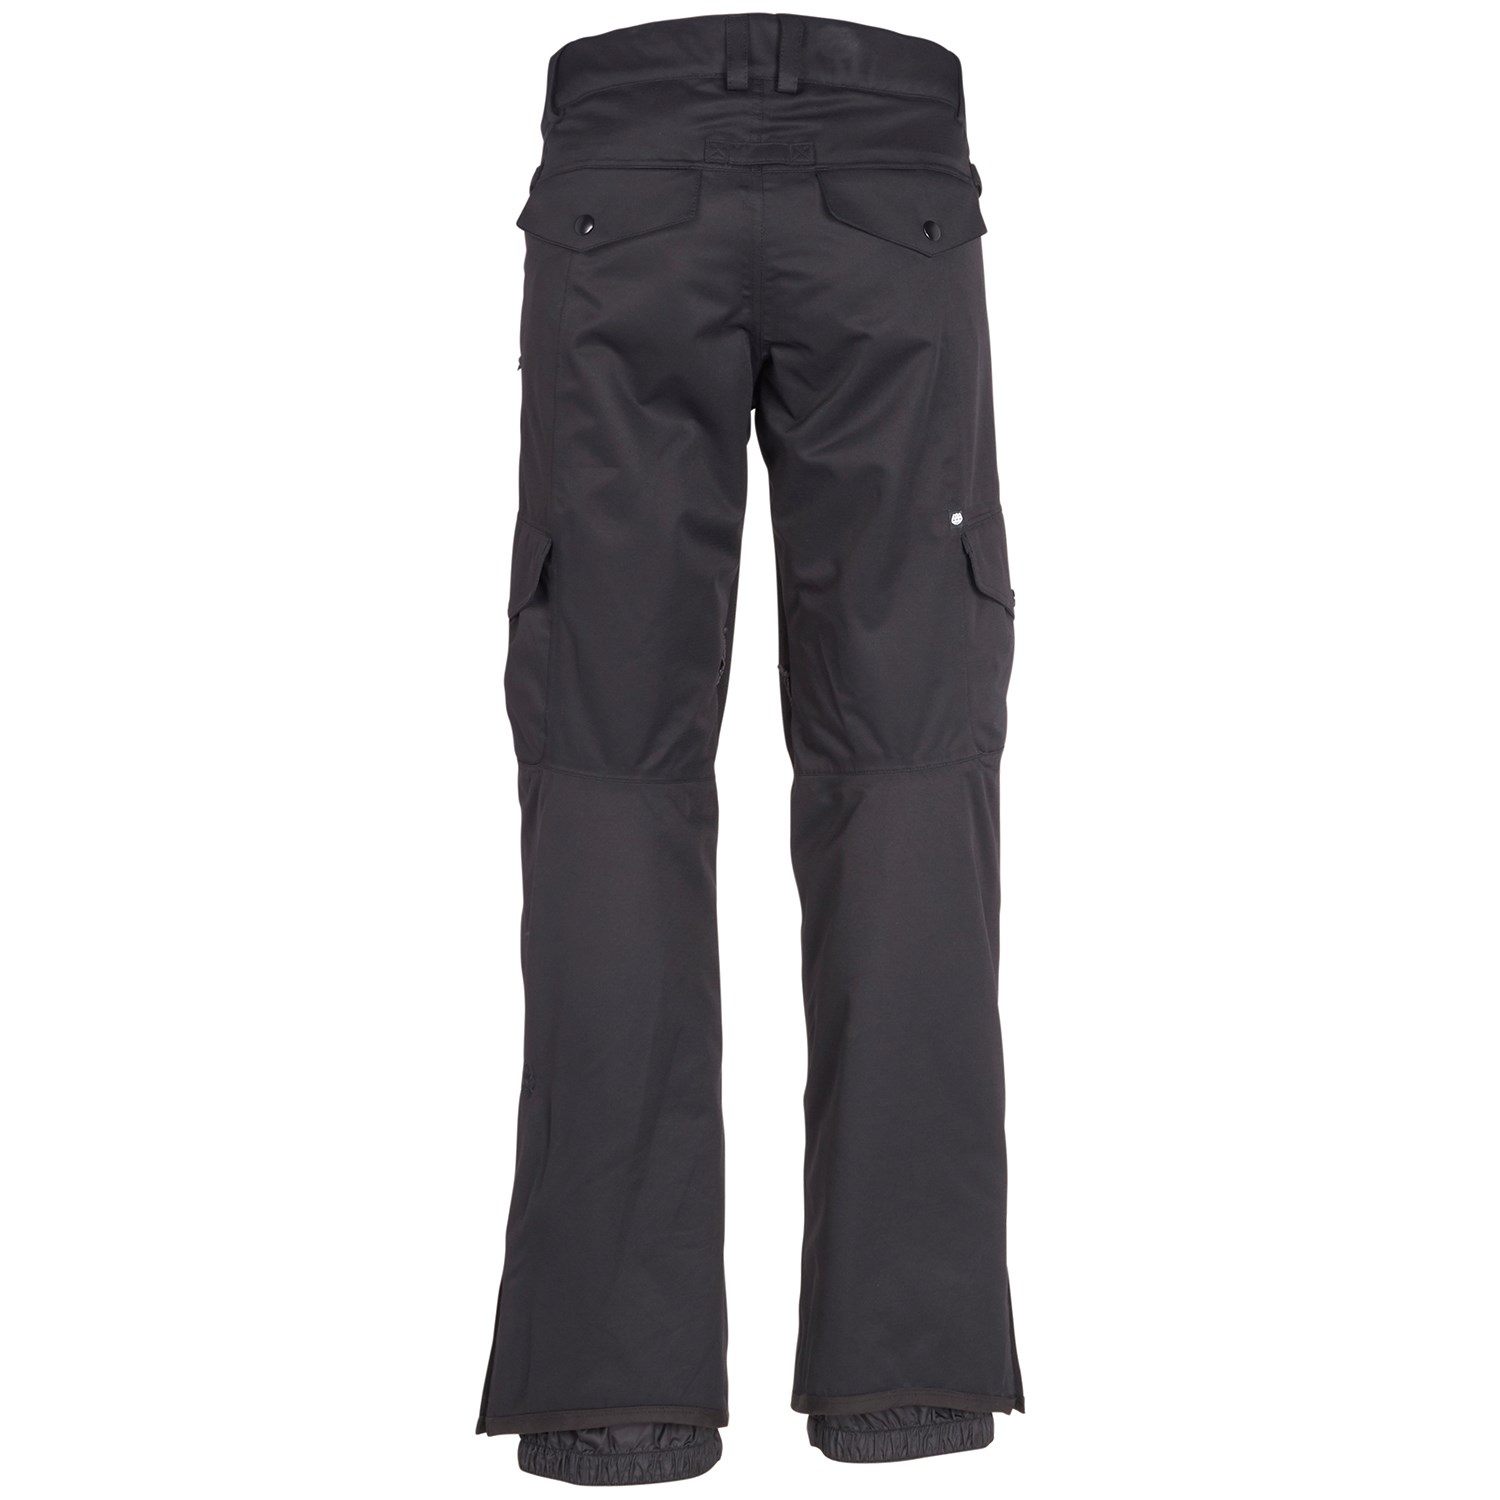 black insulated cargo pants